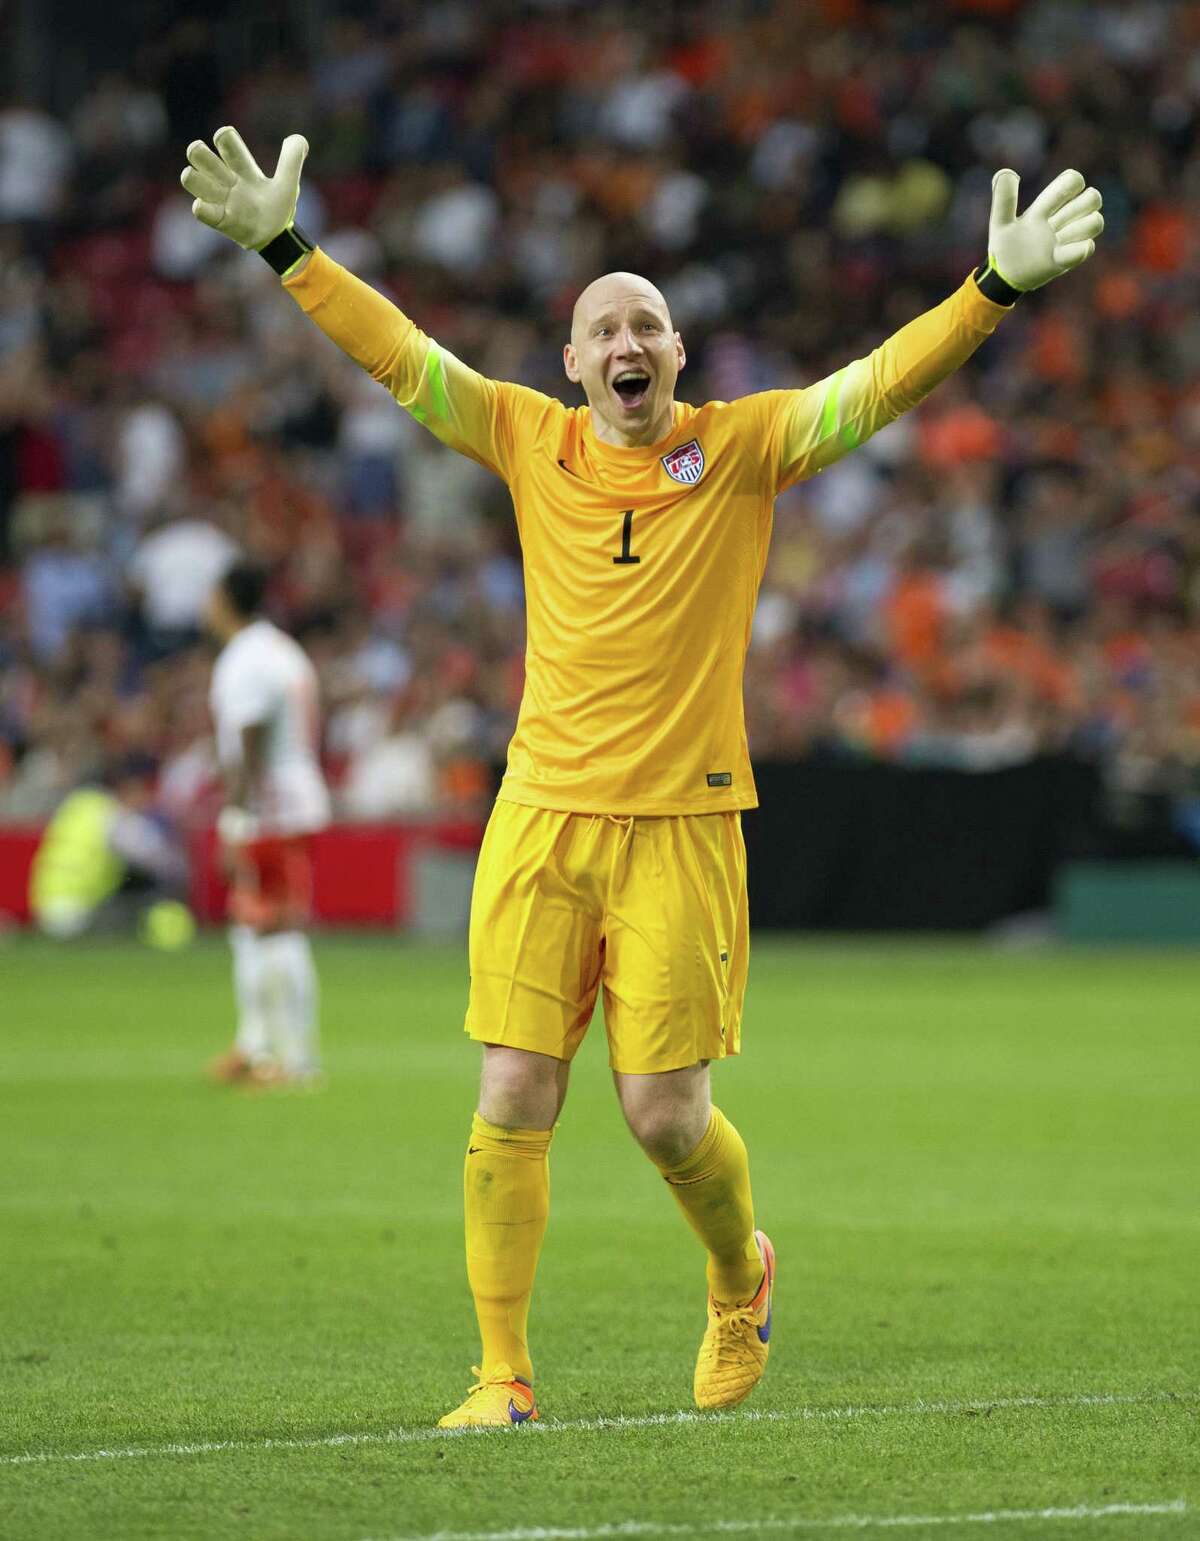 USA goalkeeper Brad Guzan celebrates the Americans’ victory over the Netherlands in an international friendly Friday at ArenA Stadium in Amsterdam.